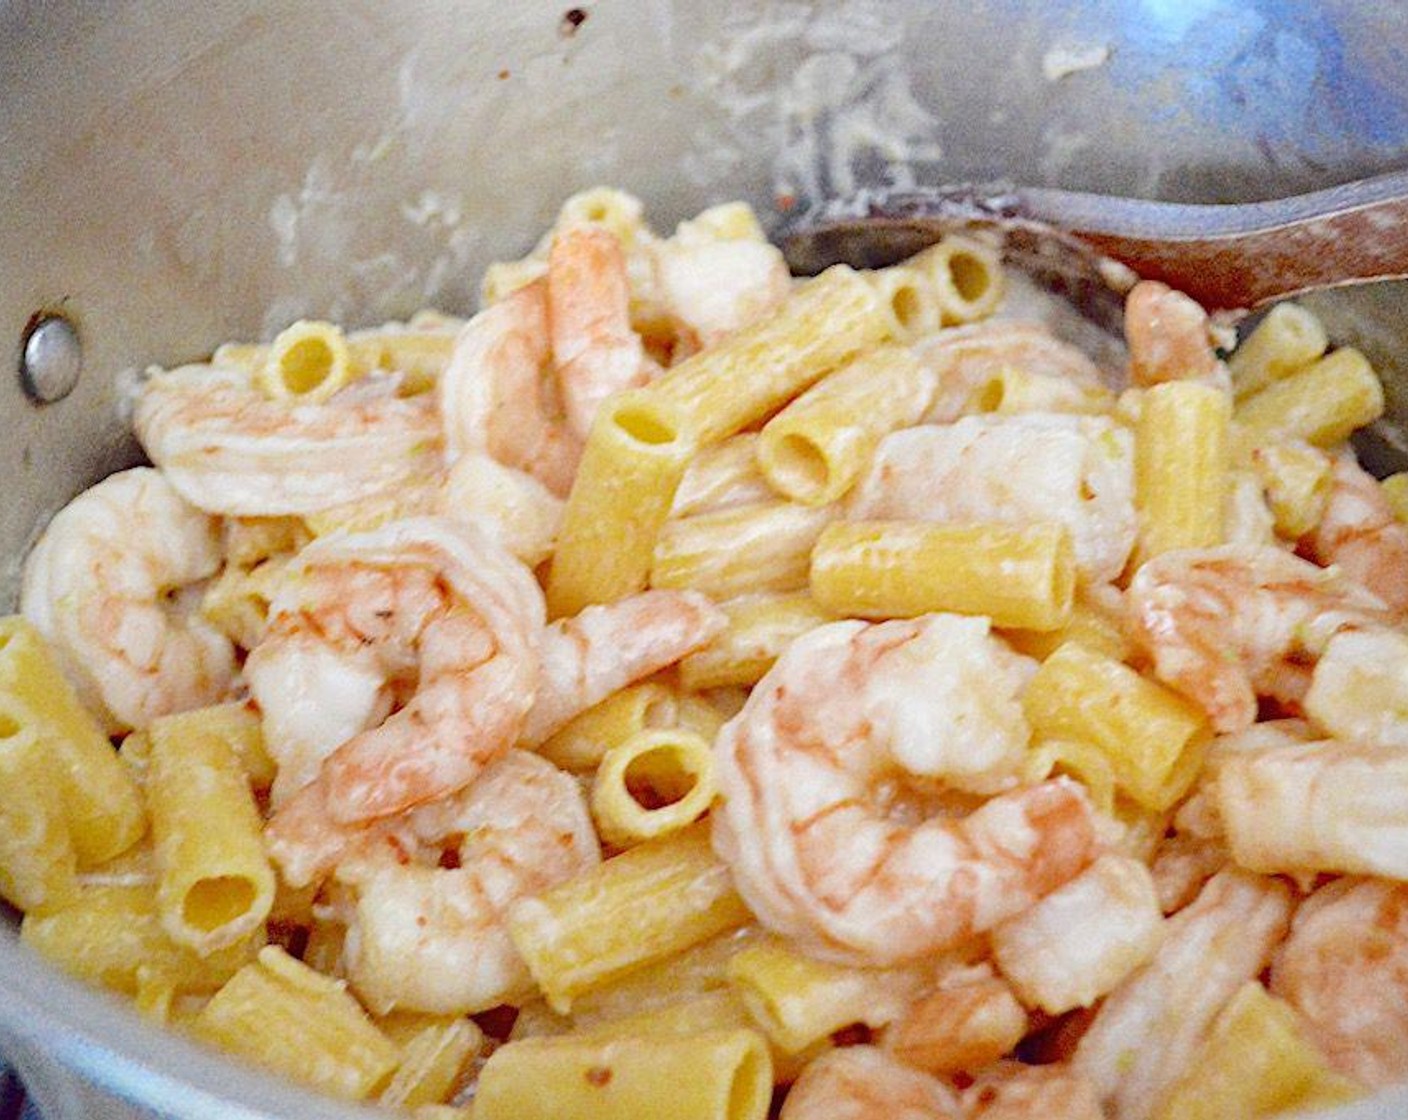 step 5 Once they're done, move the skillet off of the heat. The pasta should be done by the point. Drain it and return it to the pot it cooked in, then toss it with the sauce and shrimp.